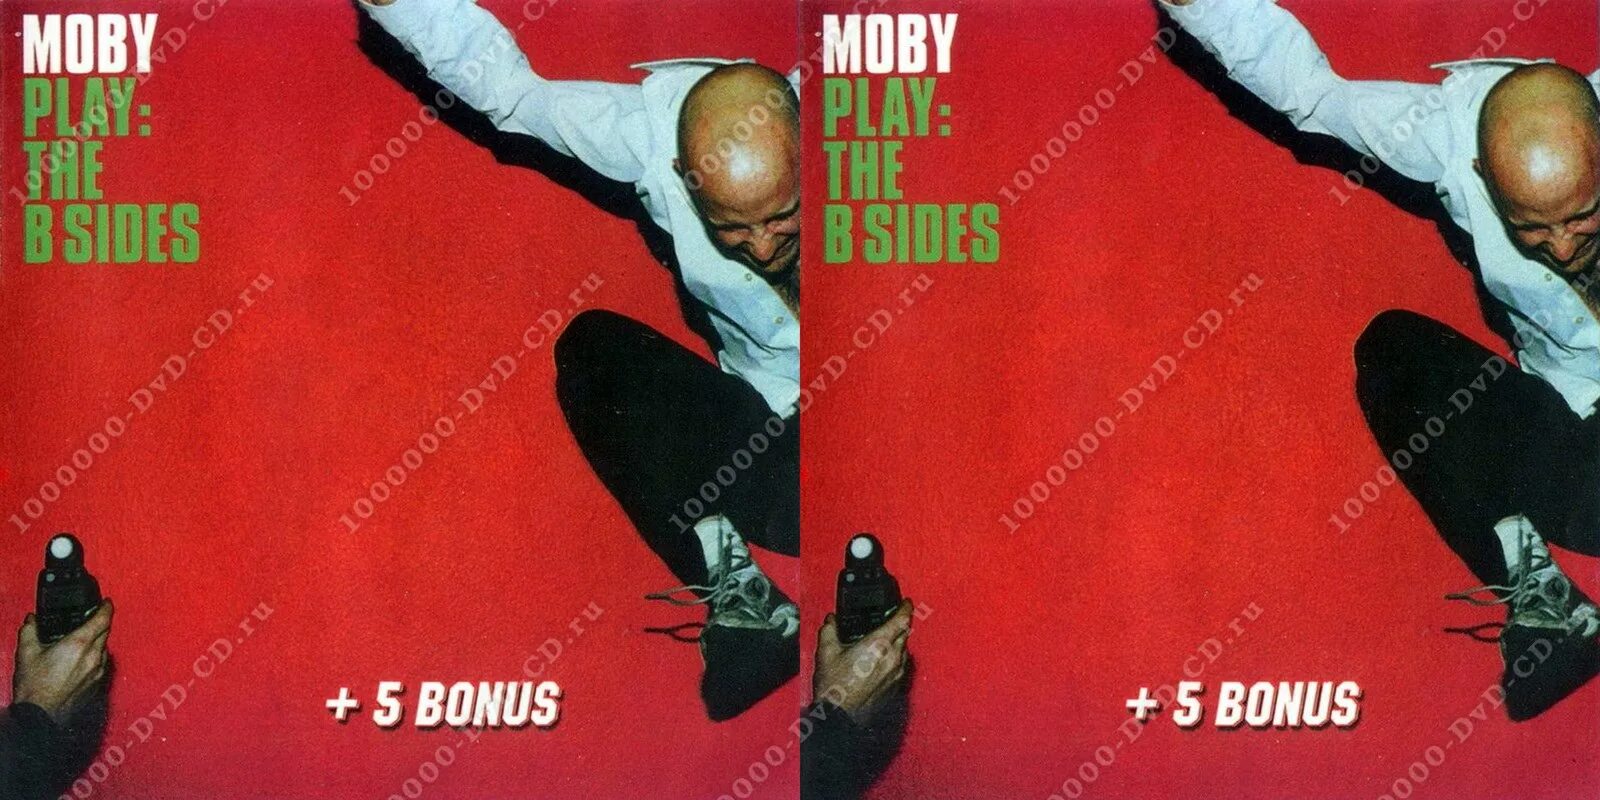 Moby play. Moby Play 1999. Moby обложка. Moby Play b Sides. Moby album Cover.